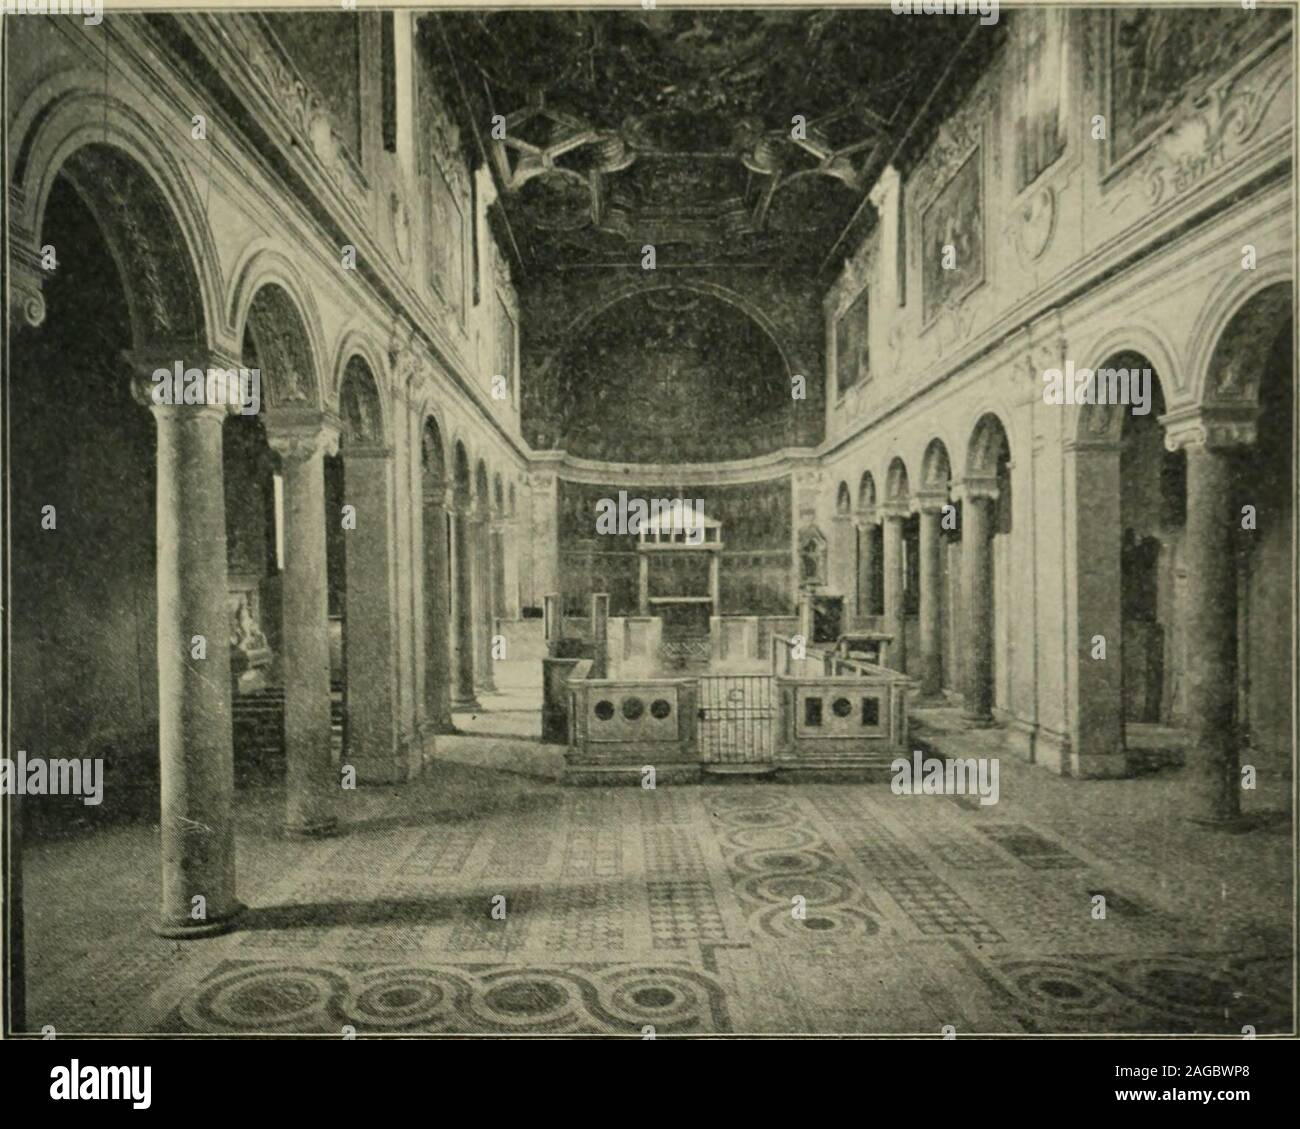 . A history of architecture in Italy from the time of Constantine to the dawn of the renaissance. nati. S. Martino ai Monti,havu the remains of atriums. sh()viiic&lt;;^ii)iiiiii;- of the twelfth century. See Vitet, p. 2W. * (lutensolin A: Knaj)]), IIiil)S(h. Motlies. Le Tarouilly, Platn»r. (irejjorovius, etc. KA KLV CI I U IS I I A N A i:( 111 IKCM KK 43 S(|iiaro paiu^ls dccorjiUul witli cinhlriiialic. &lt;lcvic&lt;.s in iiiosair, and flanUtMl oil citlur sidi; hy an anilxm or pMli)it of marble. 8. iMariM ill Irastevcre is said to liavo )vv.n huilt ori&lt;,niially hy St. Calixtus about 220. I Stock Photo